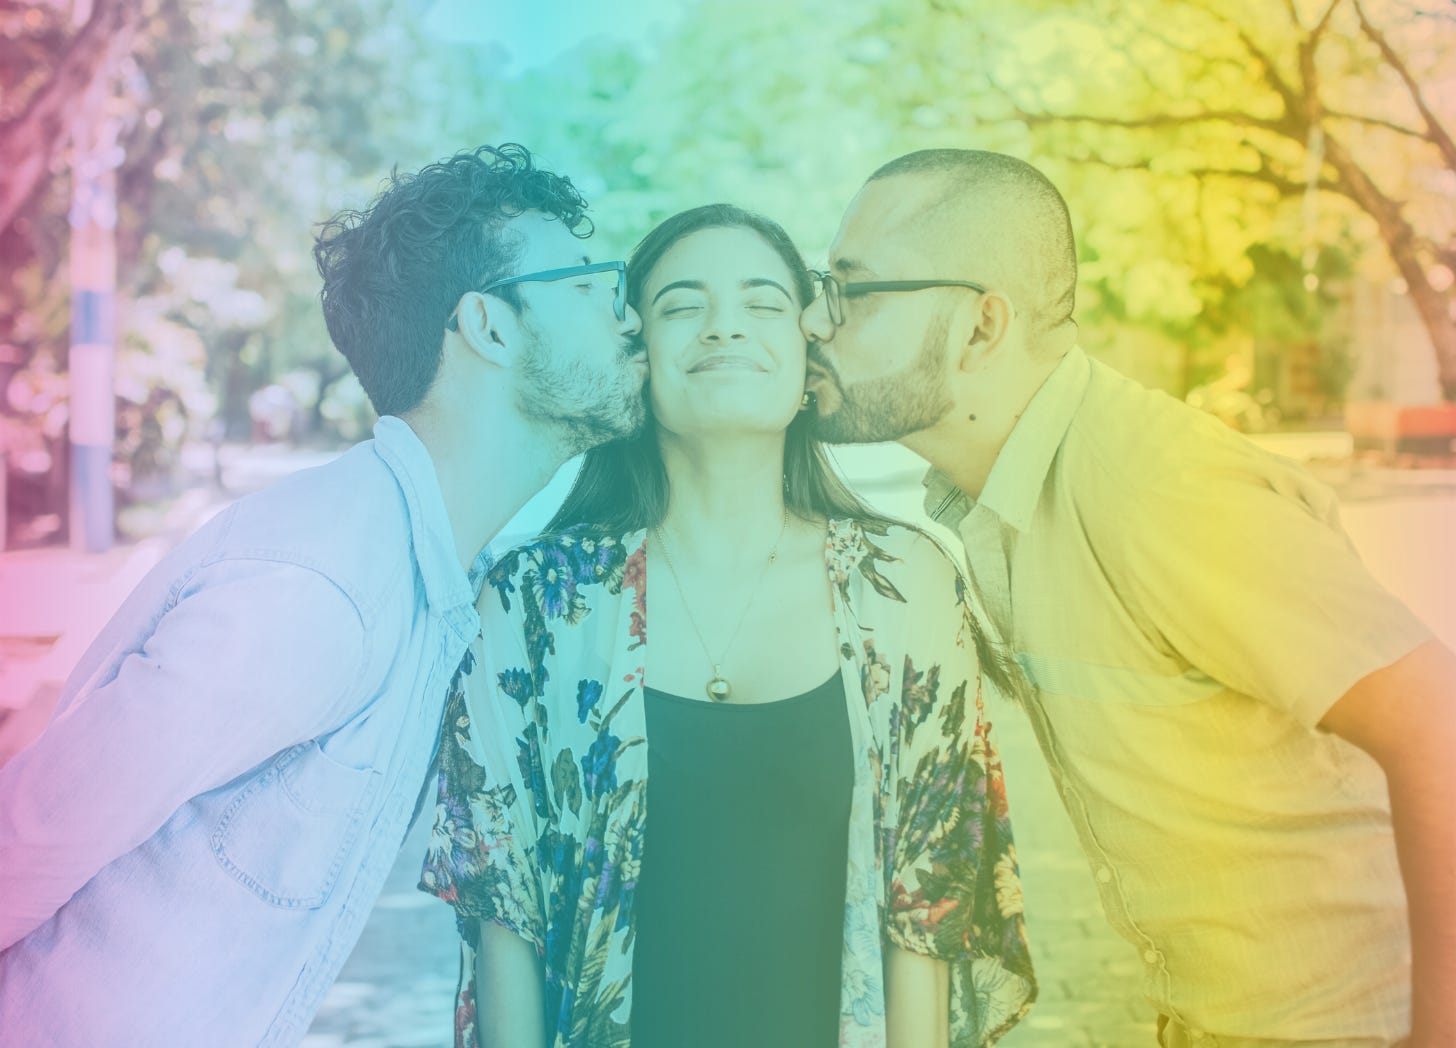 A rainbow-filtered photo of a femme-presenting person with olive skin smiling and closing her eyes as two men—one on either side of her—kisses her cheeks dotingly.